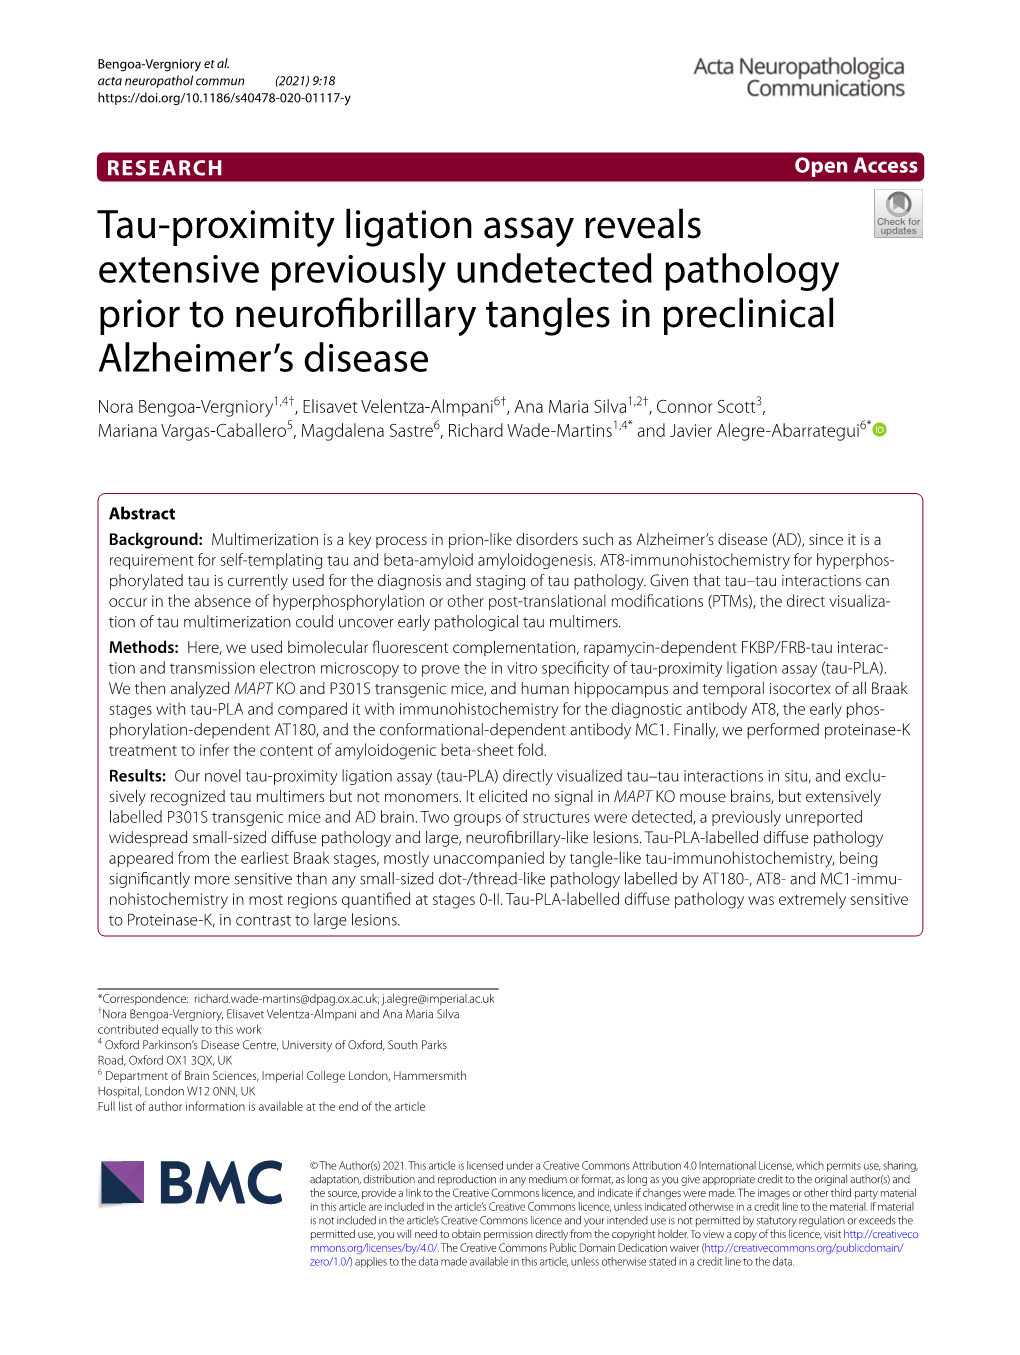 Tau-Proximity Ligation Assay Reveals Extensive Previously Undetected Pathology Prior to Neurofibrillary Tangles in Preclinical A